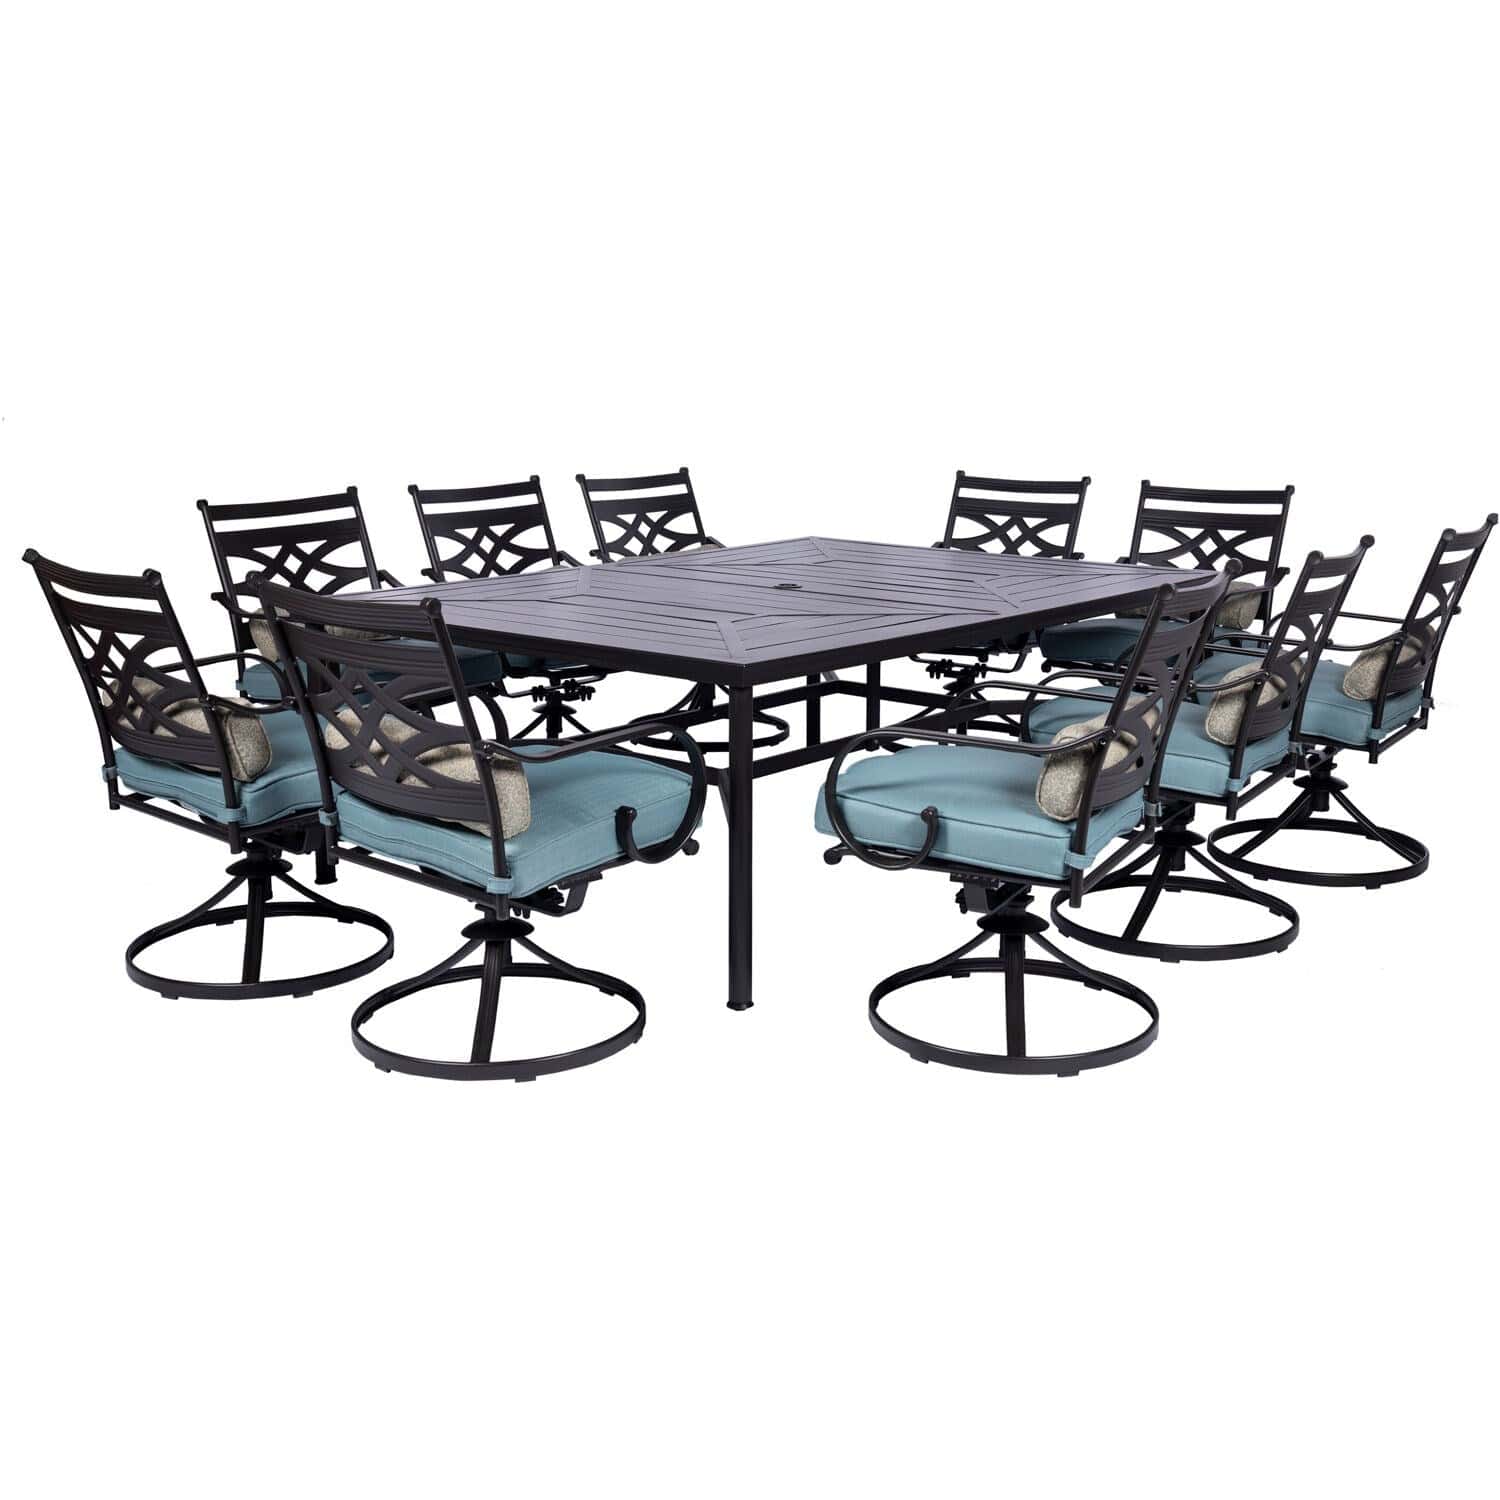 Hanover Outdoor Dining Set Hanover - Montclair 11-Piece Dining Set with 10 Swivel Rockers and Table - Ocean Blue and Brown | MCLRDN11PCSW10-BLU